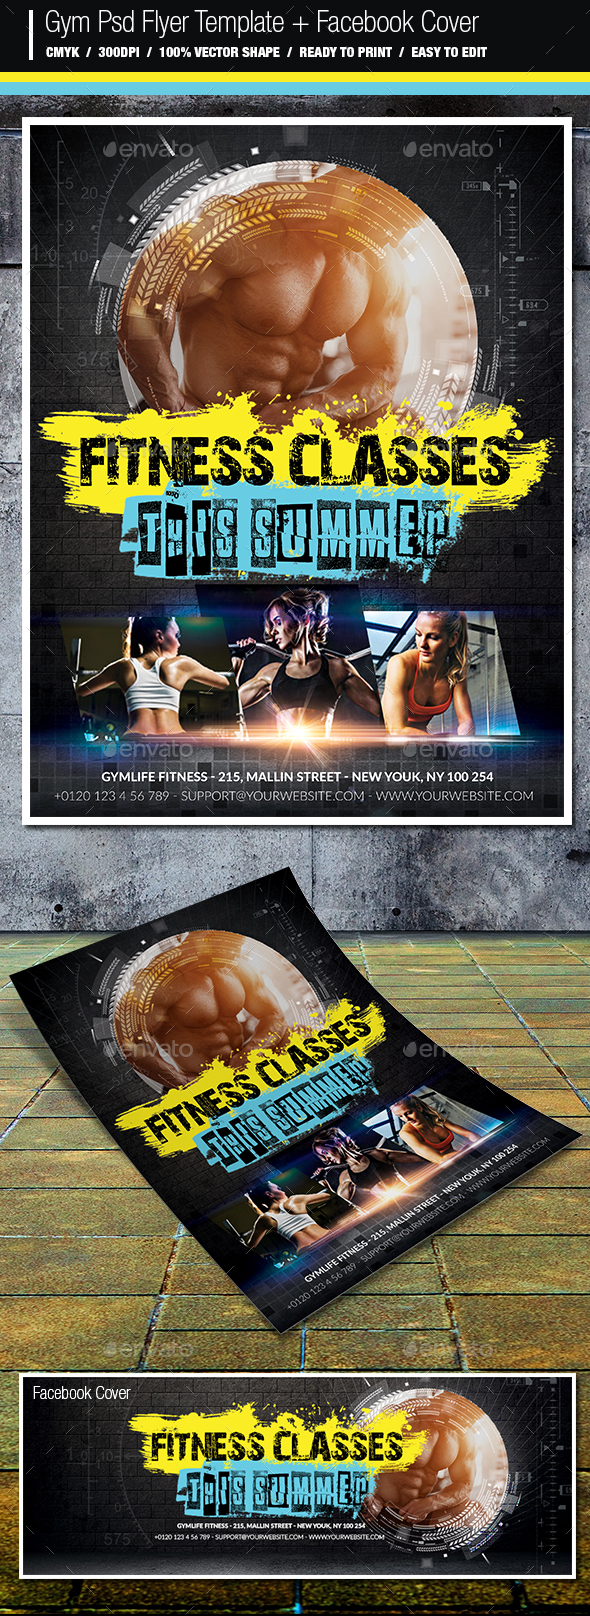 Gym Flyer And Facebook Cover